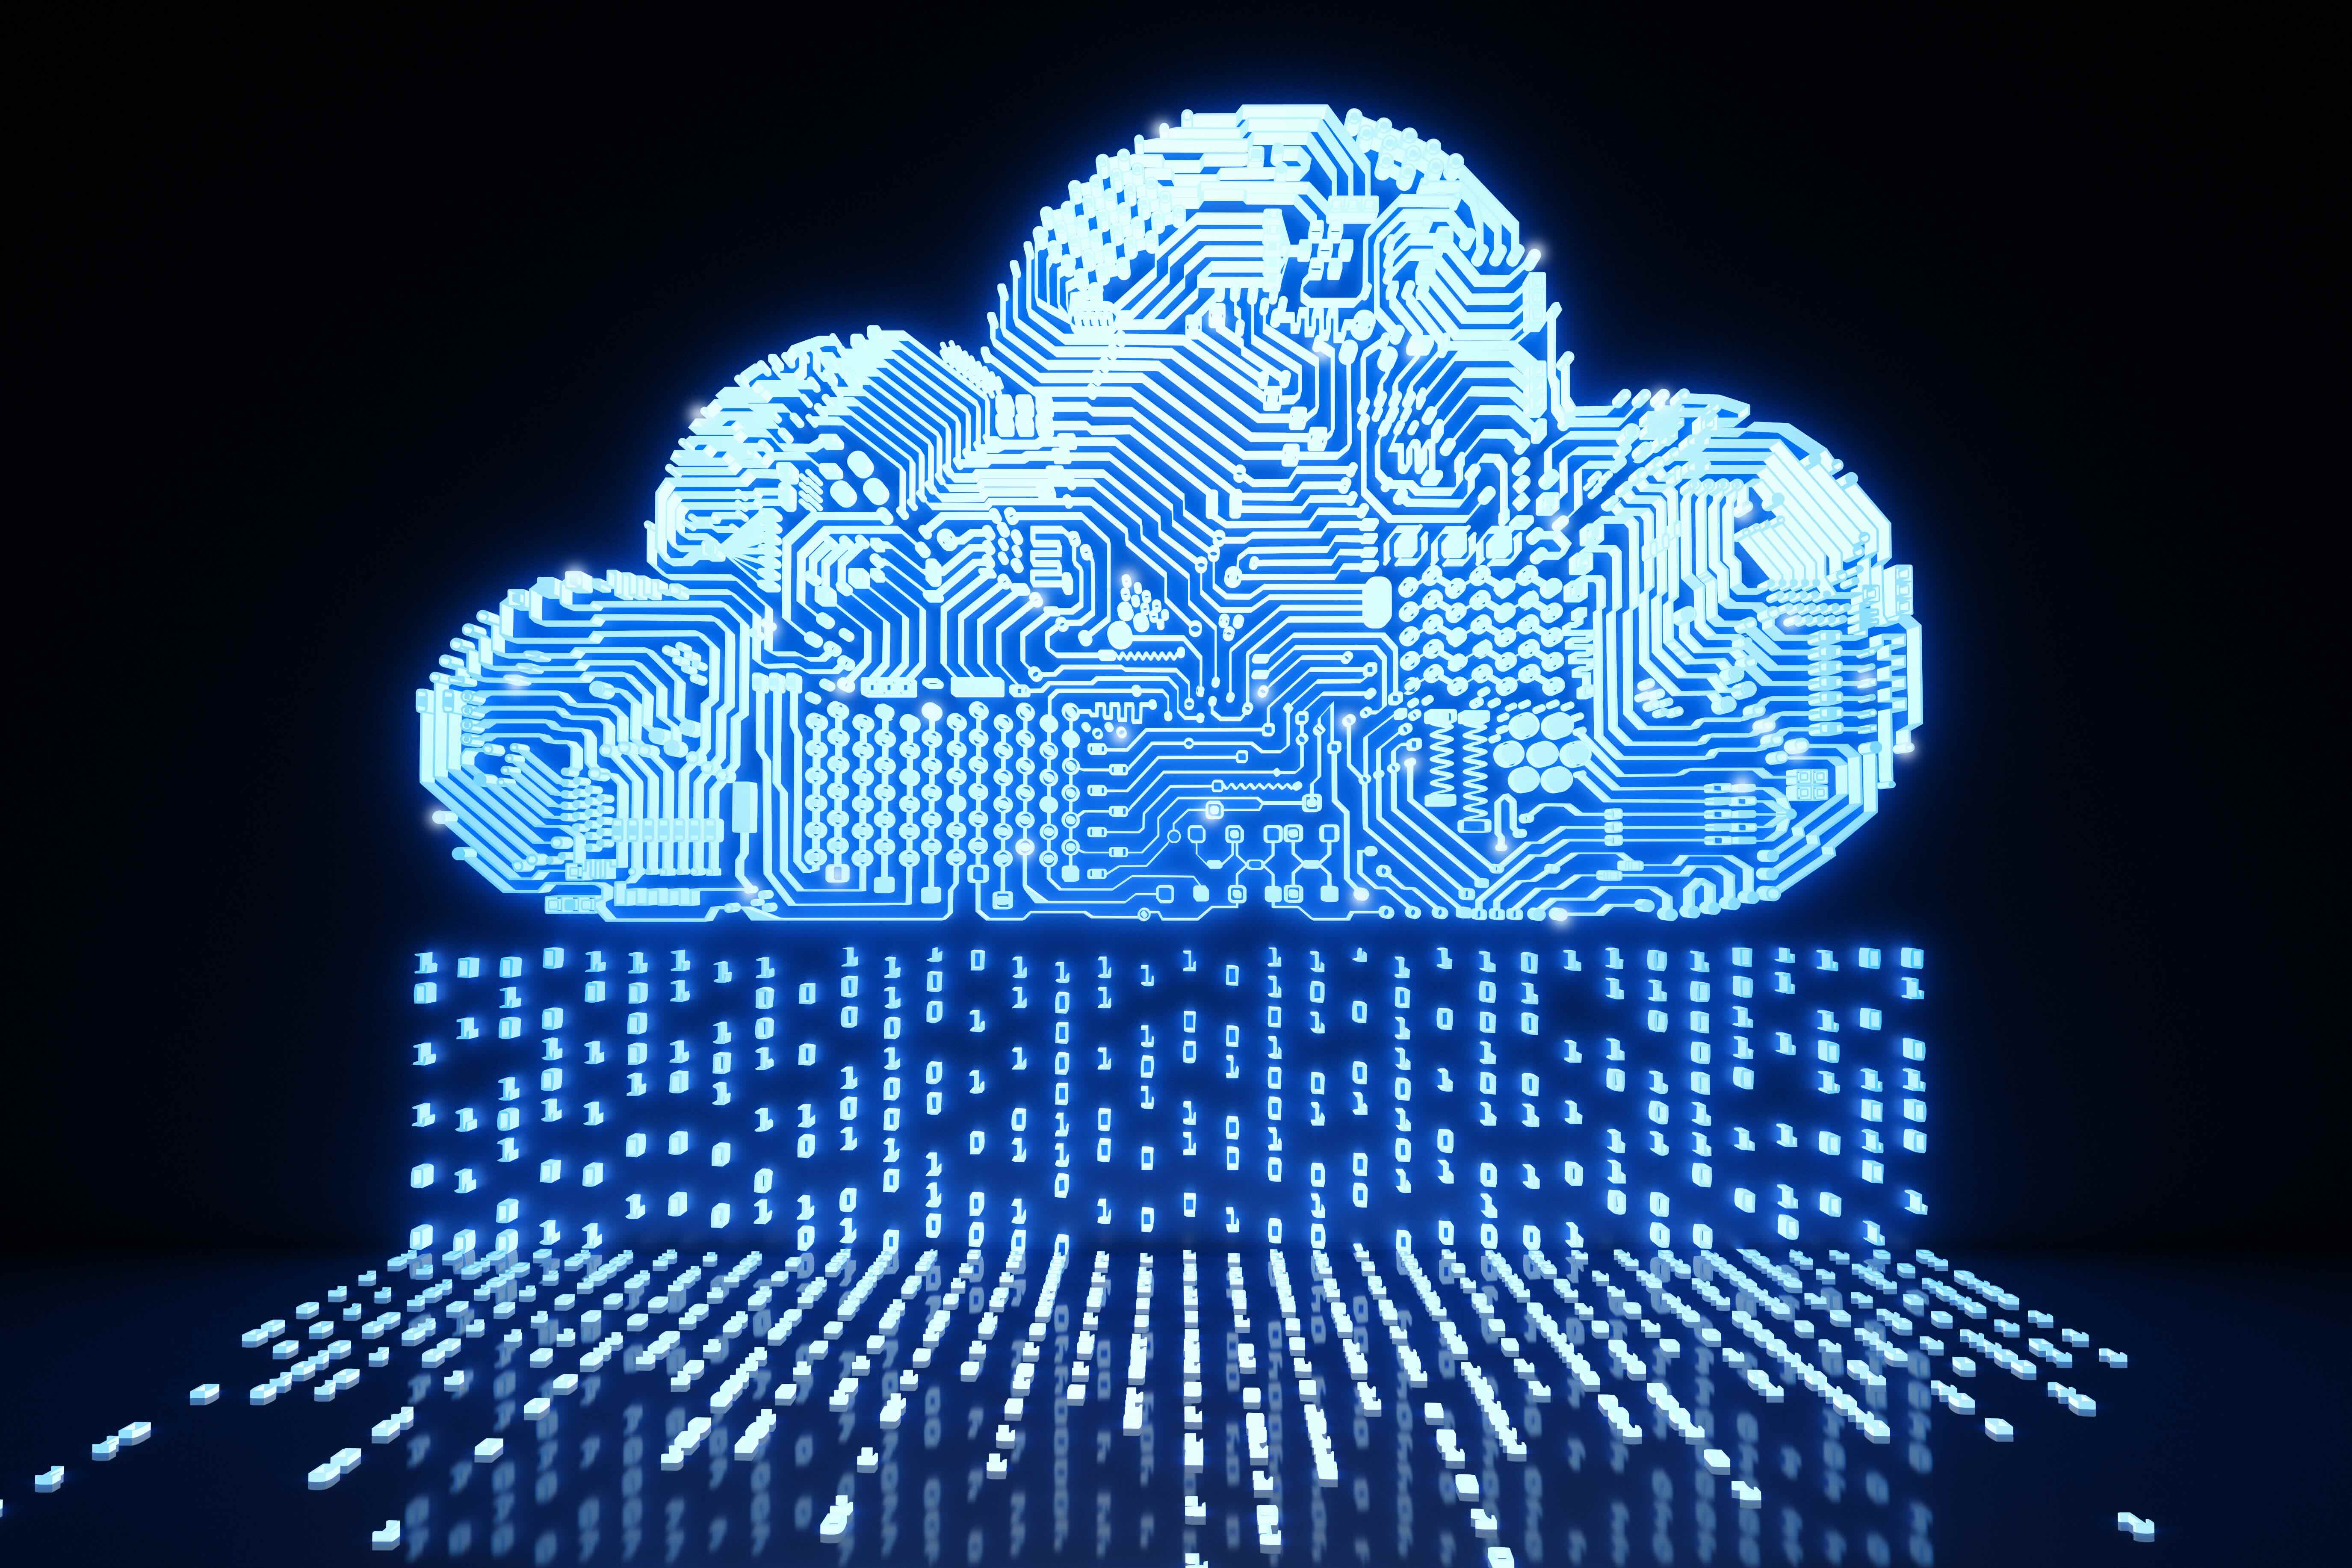 Image shows a digital rendering of a cloud